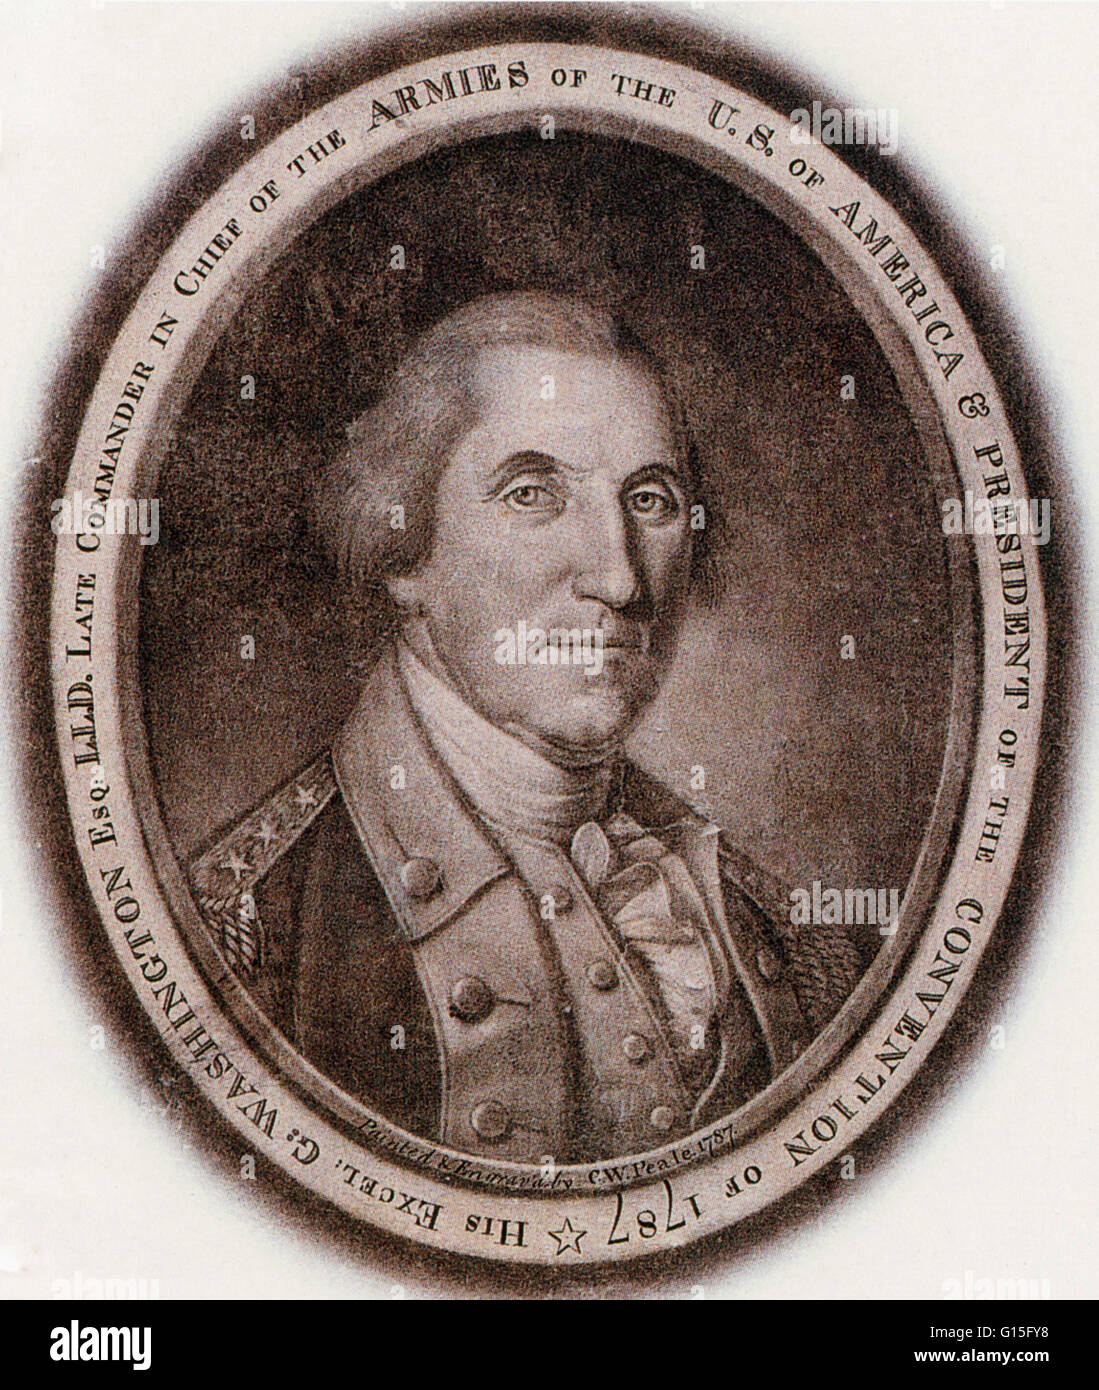 Portrait was issued in September 1787 at the culmination of the Constitutional Convention over which Washington presided. Printed portraits of him were ubiquitous in America during and after his lifetime, but few displayed the artistry and technical skill Stock Photo